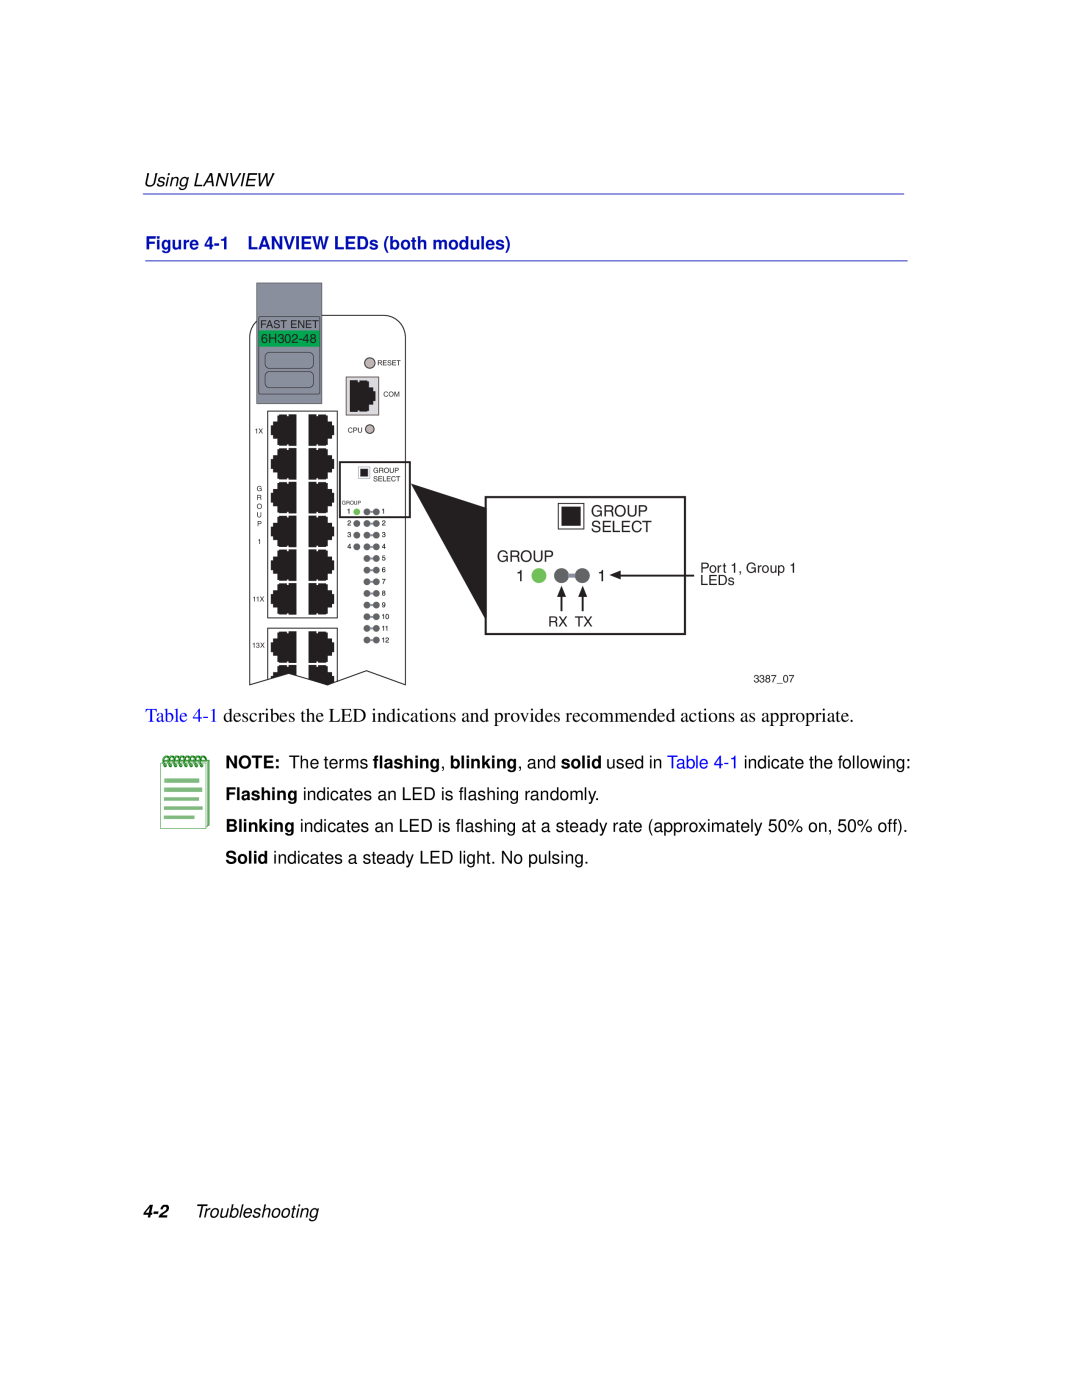 Enterasys Networks 6H302-48 manual Using LANVIEW, 1 LANVIEW LEDs both modules, Troubleshooting 